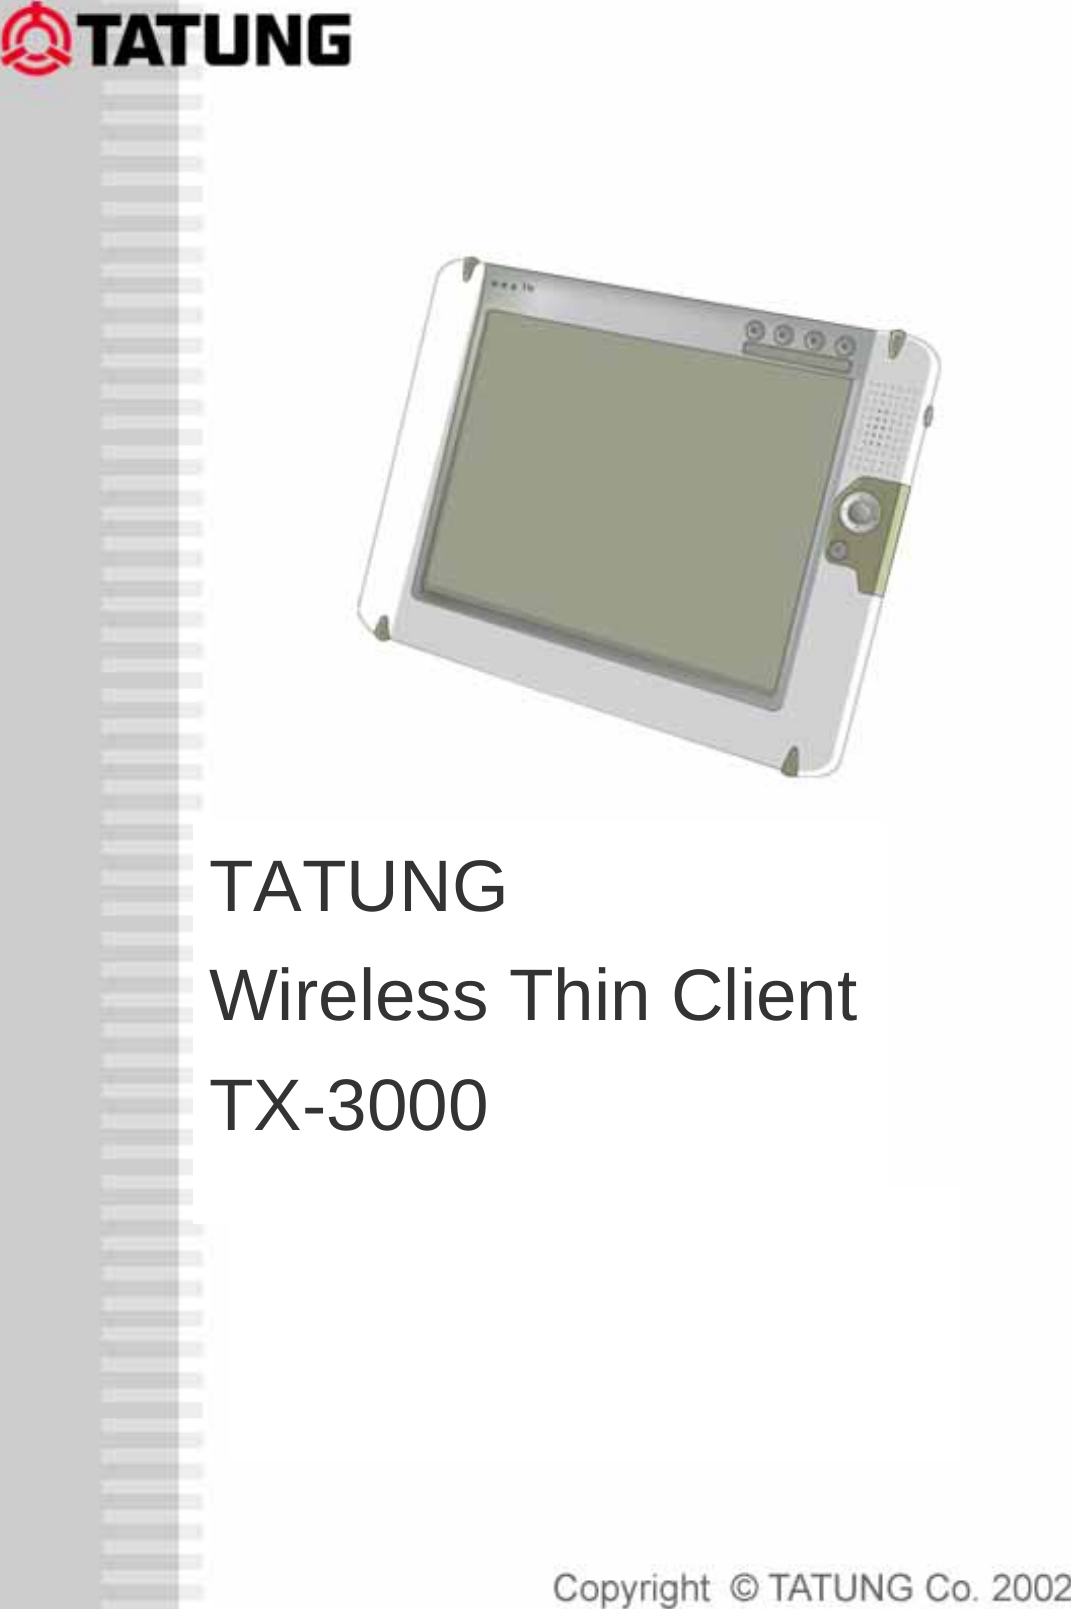    2006/8/23                                                                          page1   TATUNG  Wireless Thin Client TX-3000   